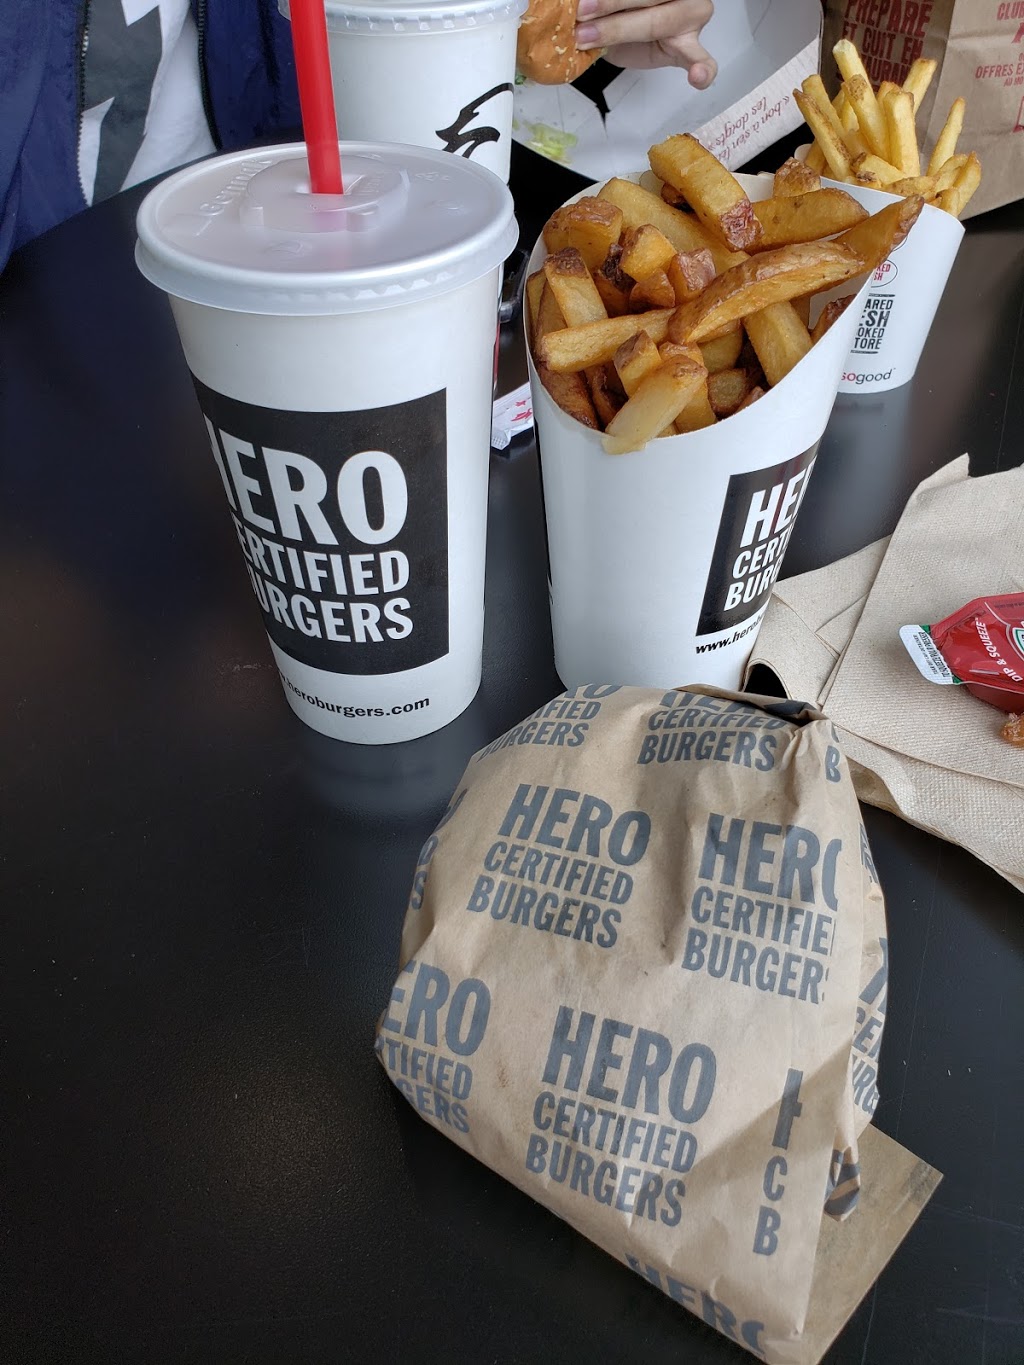 Hero Certified Burgers | Scarborough Campus Student Centre, 1265 Military Trail, Scarborough, ON M1C 1A4, Canada | Phone: (647) 891-0058